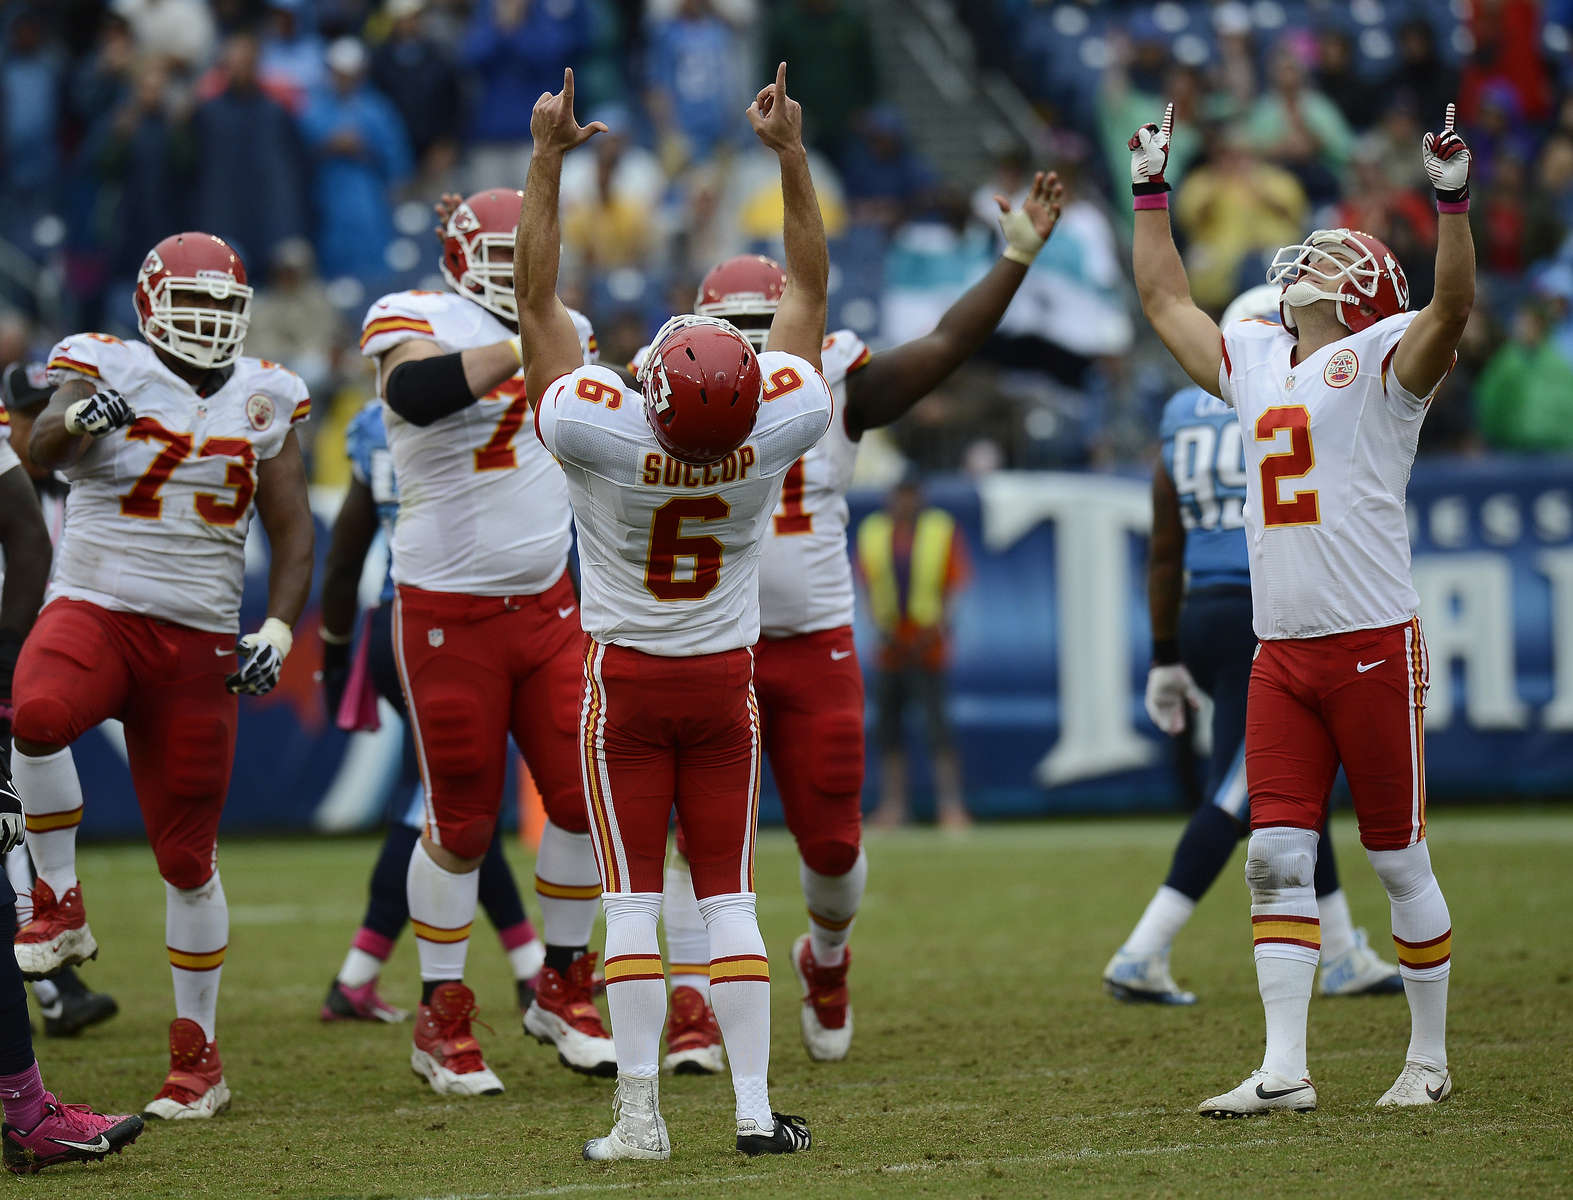 Kansas City Chiefs kicker Ryan Succop and holder Dustin Colquitt celebrate after Succop made a 48-yard field goal to seal a 26-17 win over the Tennessee Titans in thefinal minutes of the fourth quarter of an NFL football game on Oct. 6, 2013, in Nashville, Tenn. (AP Photo/ Mark Zaleski)